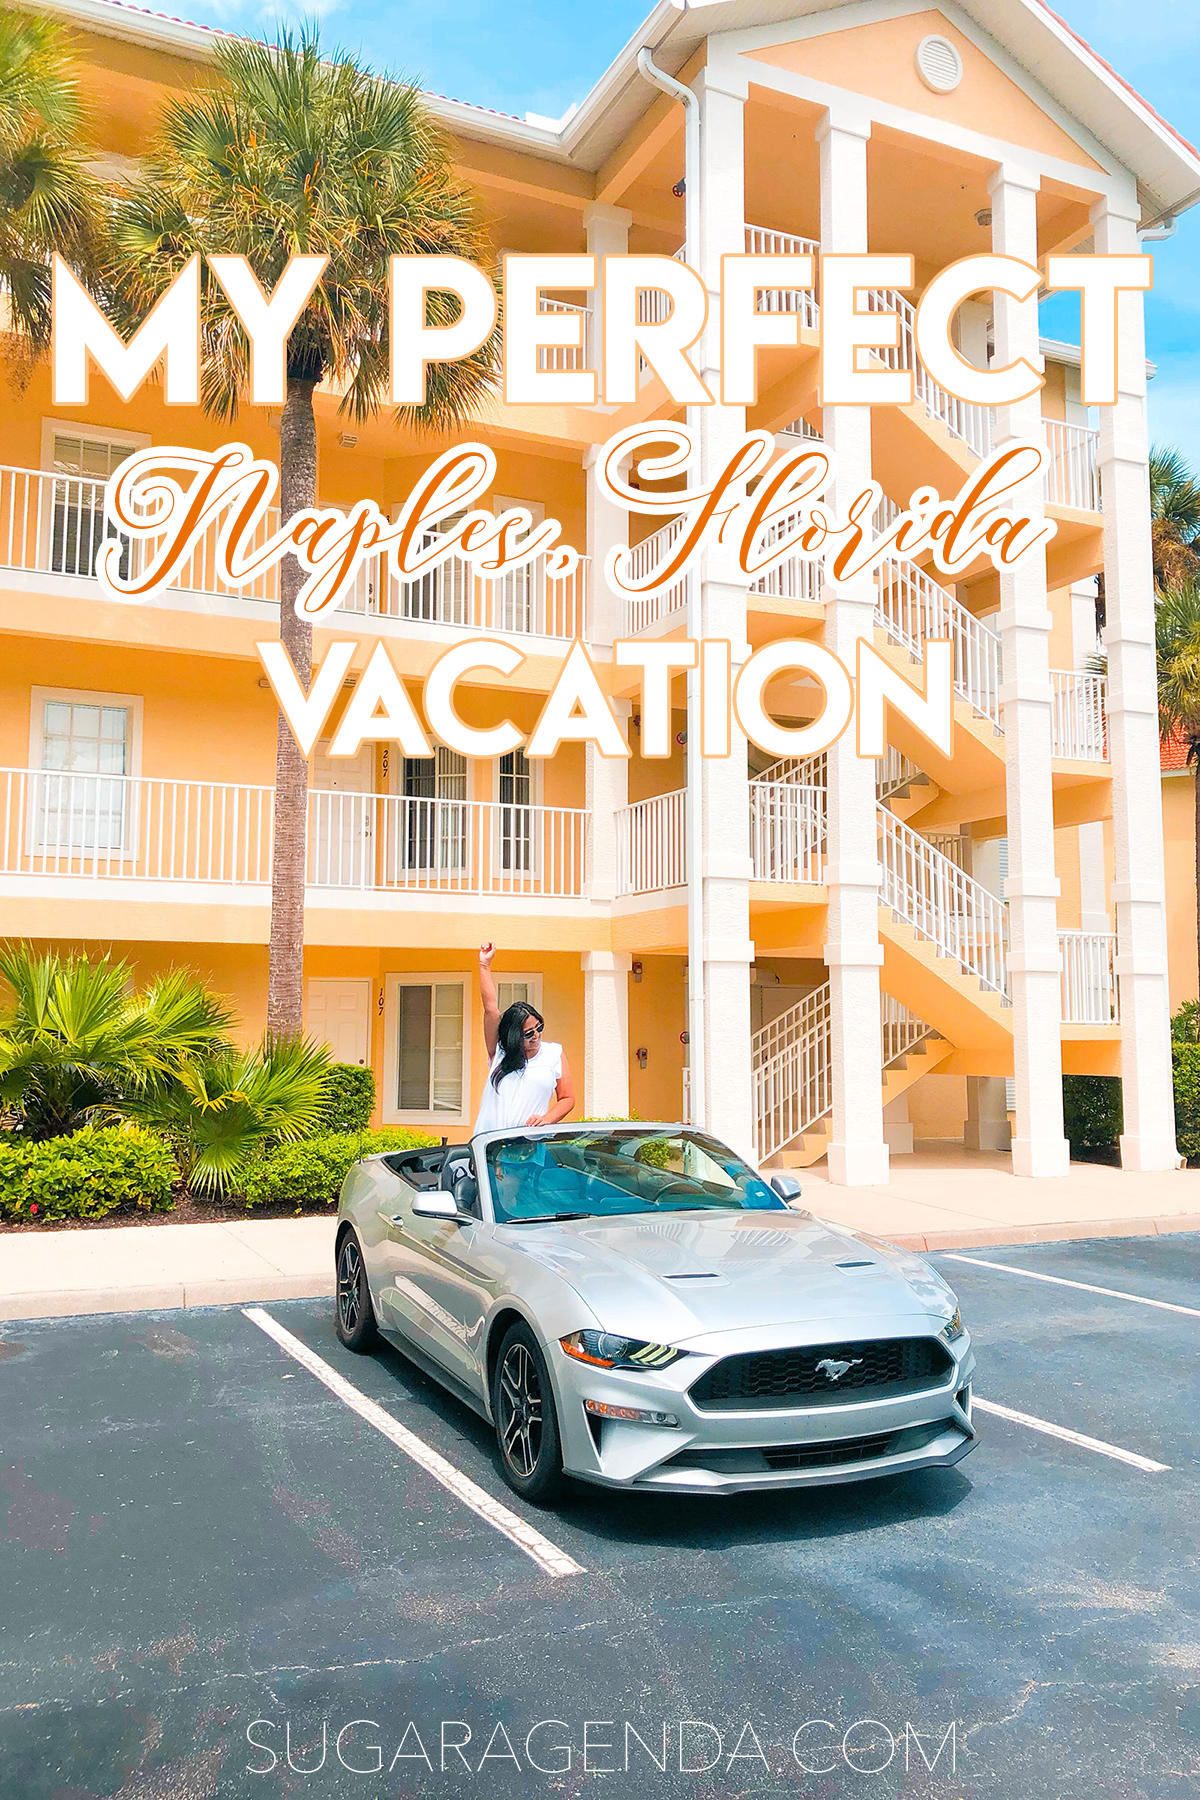 Take a look at my trip to Naples, Florida and how I discovered all they had to offer (especially the food!)